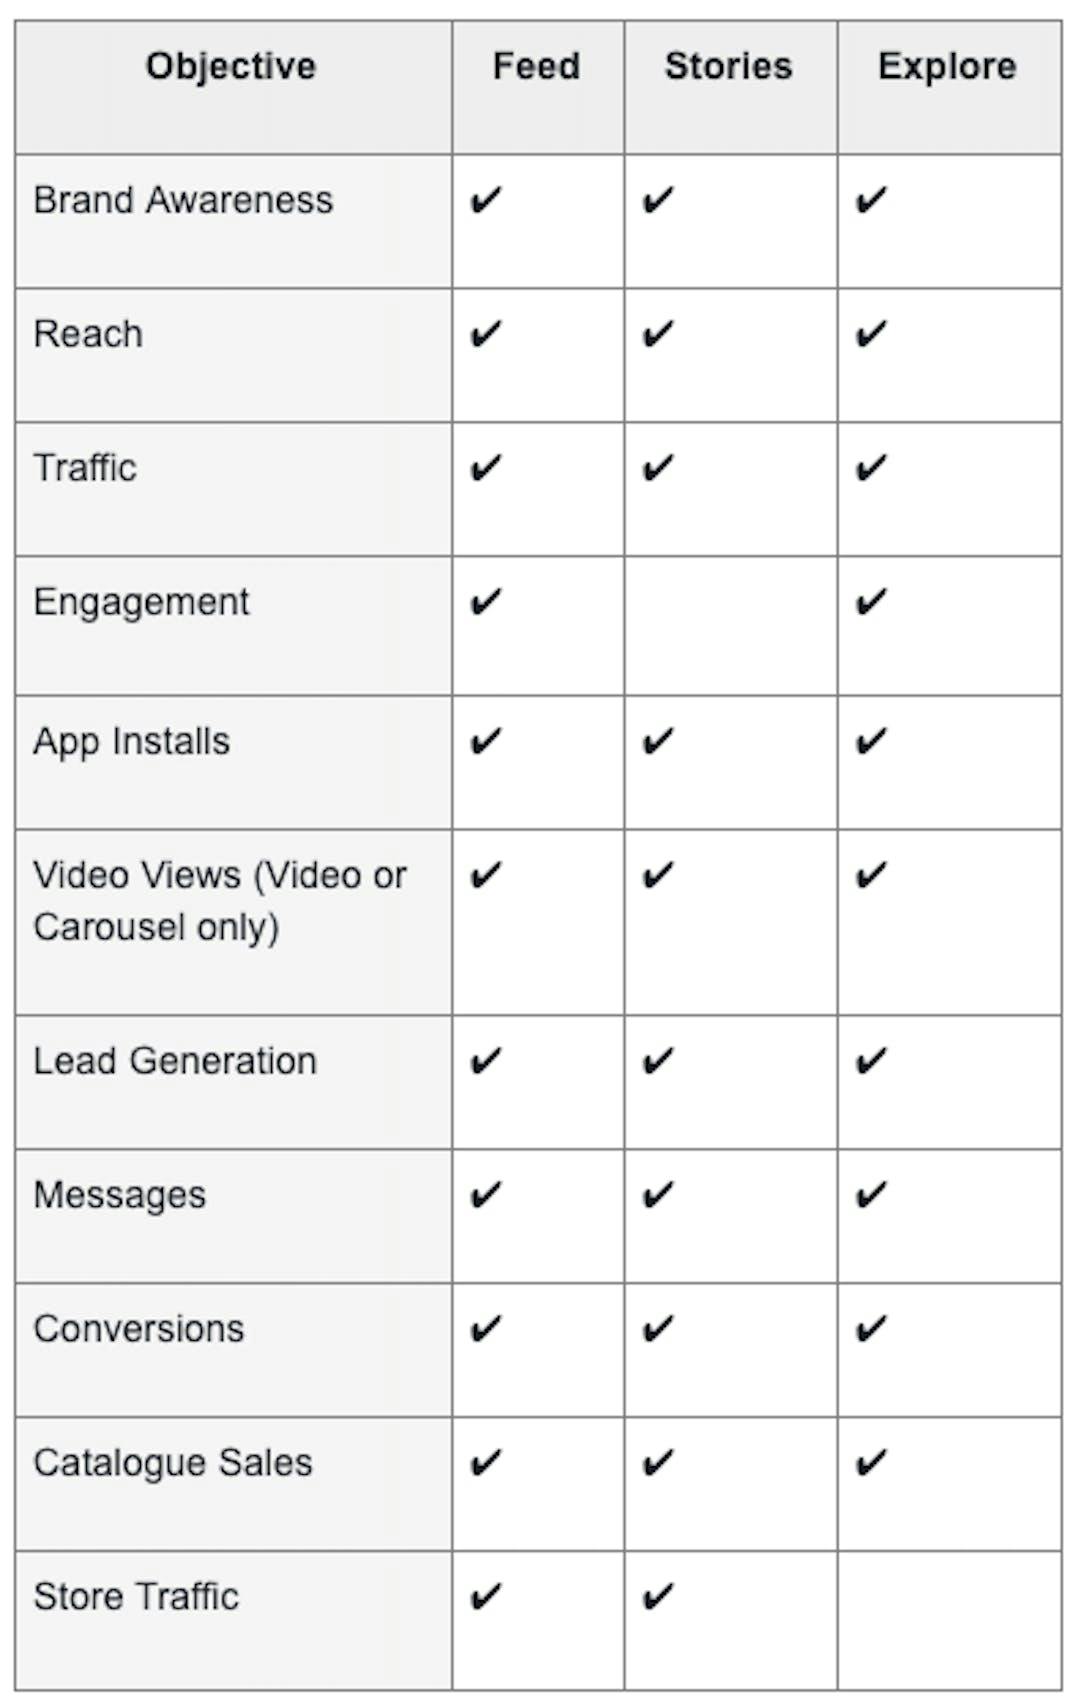 A table showing different ad objectives for Instagram Ads